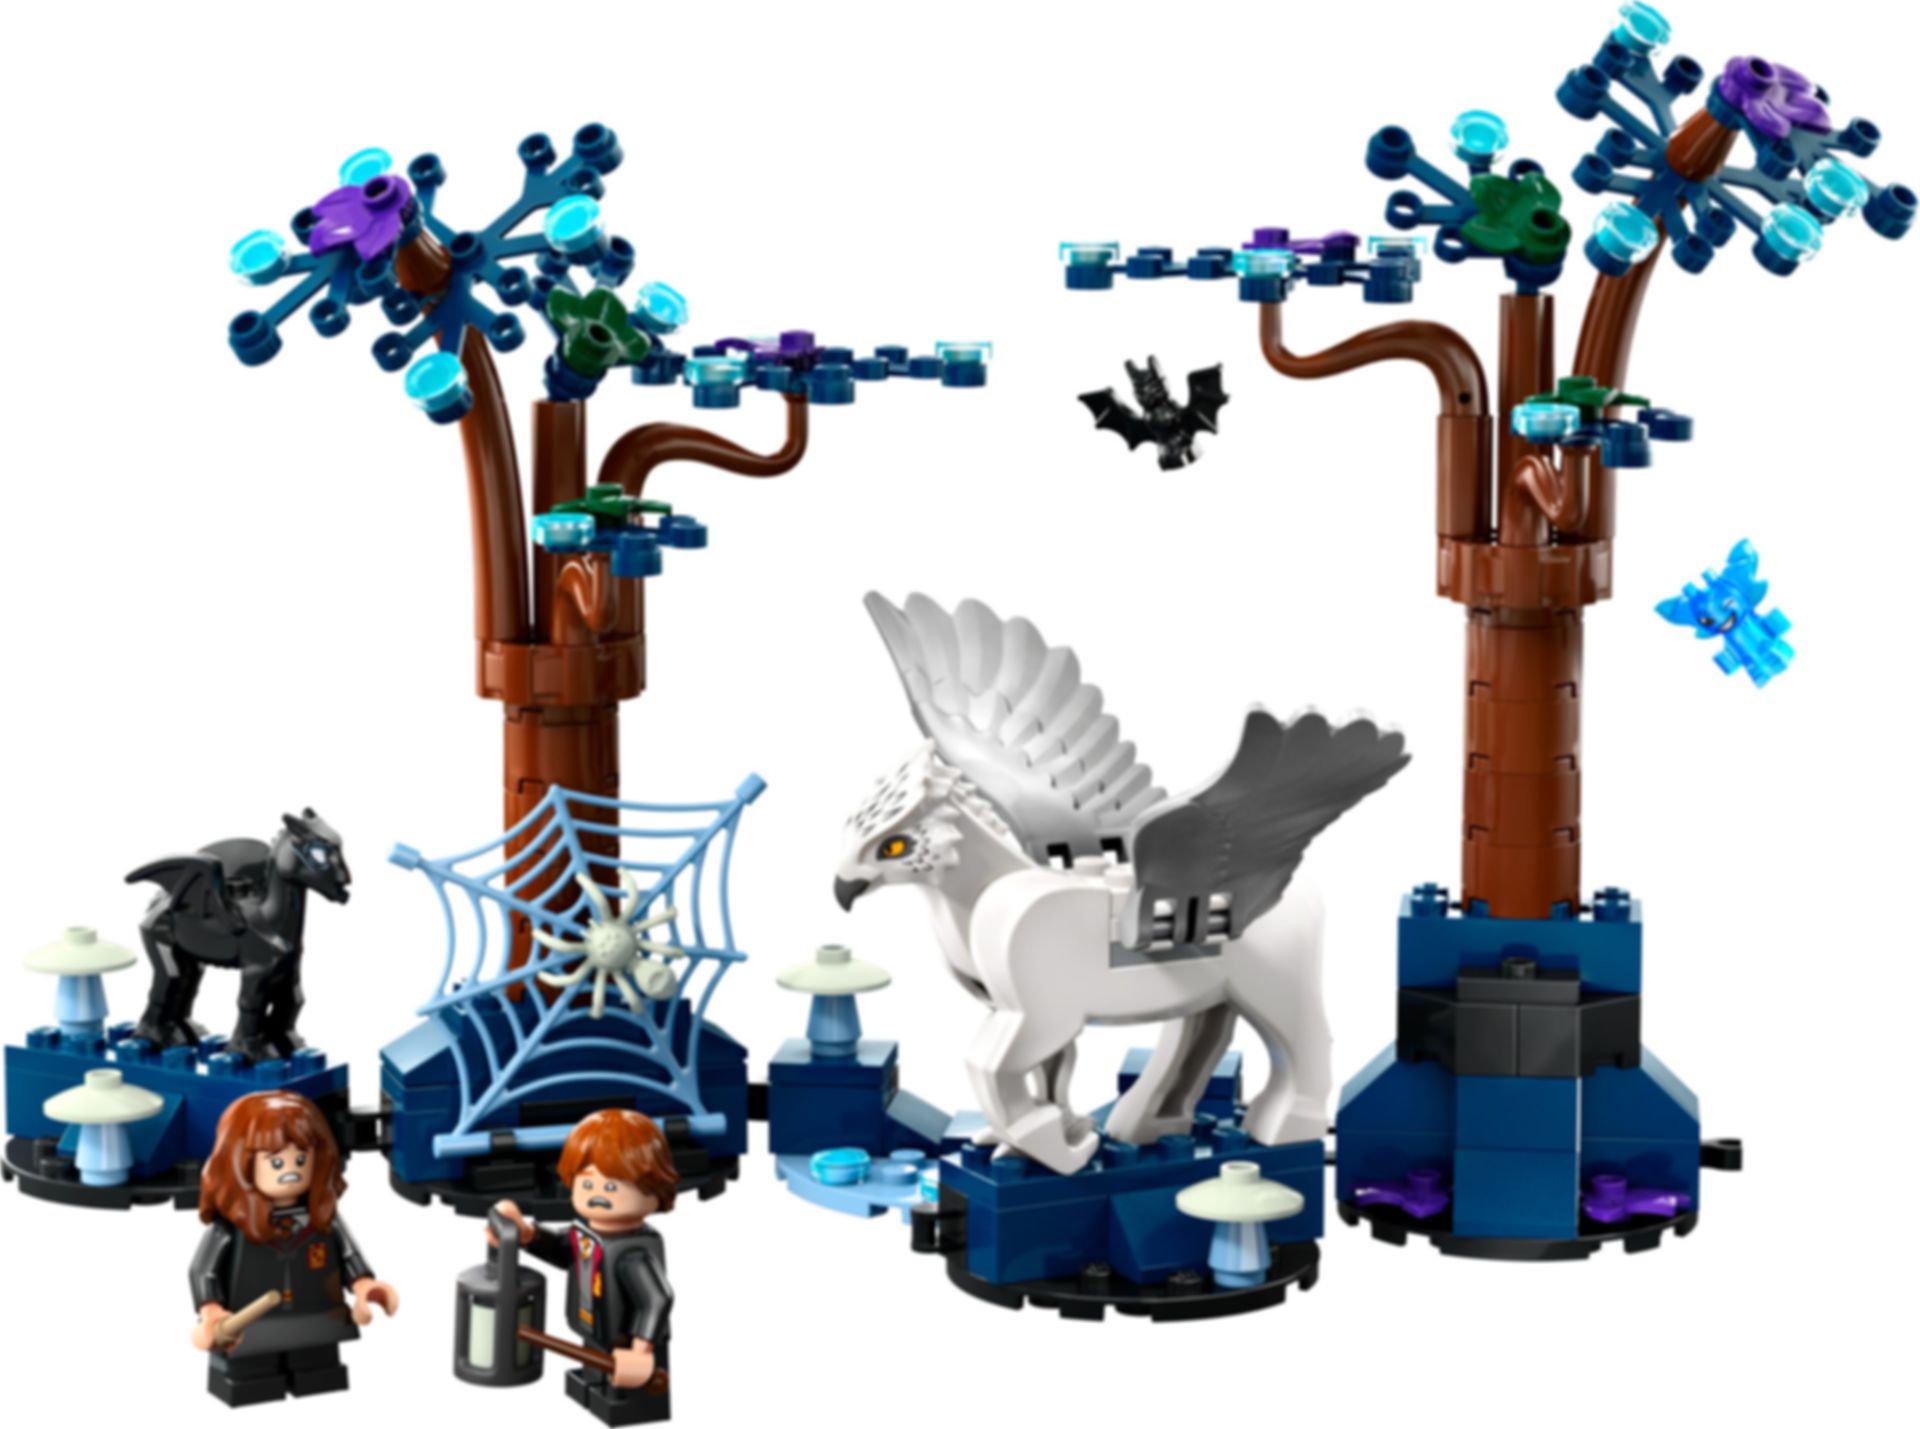 LEGO® Harry Potter™ Forbidden Forest: Magical Creatures components